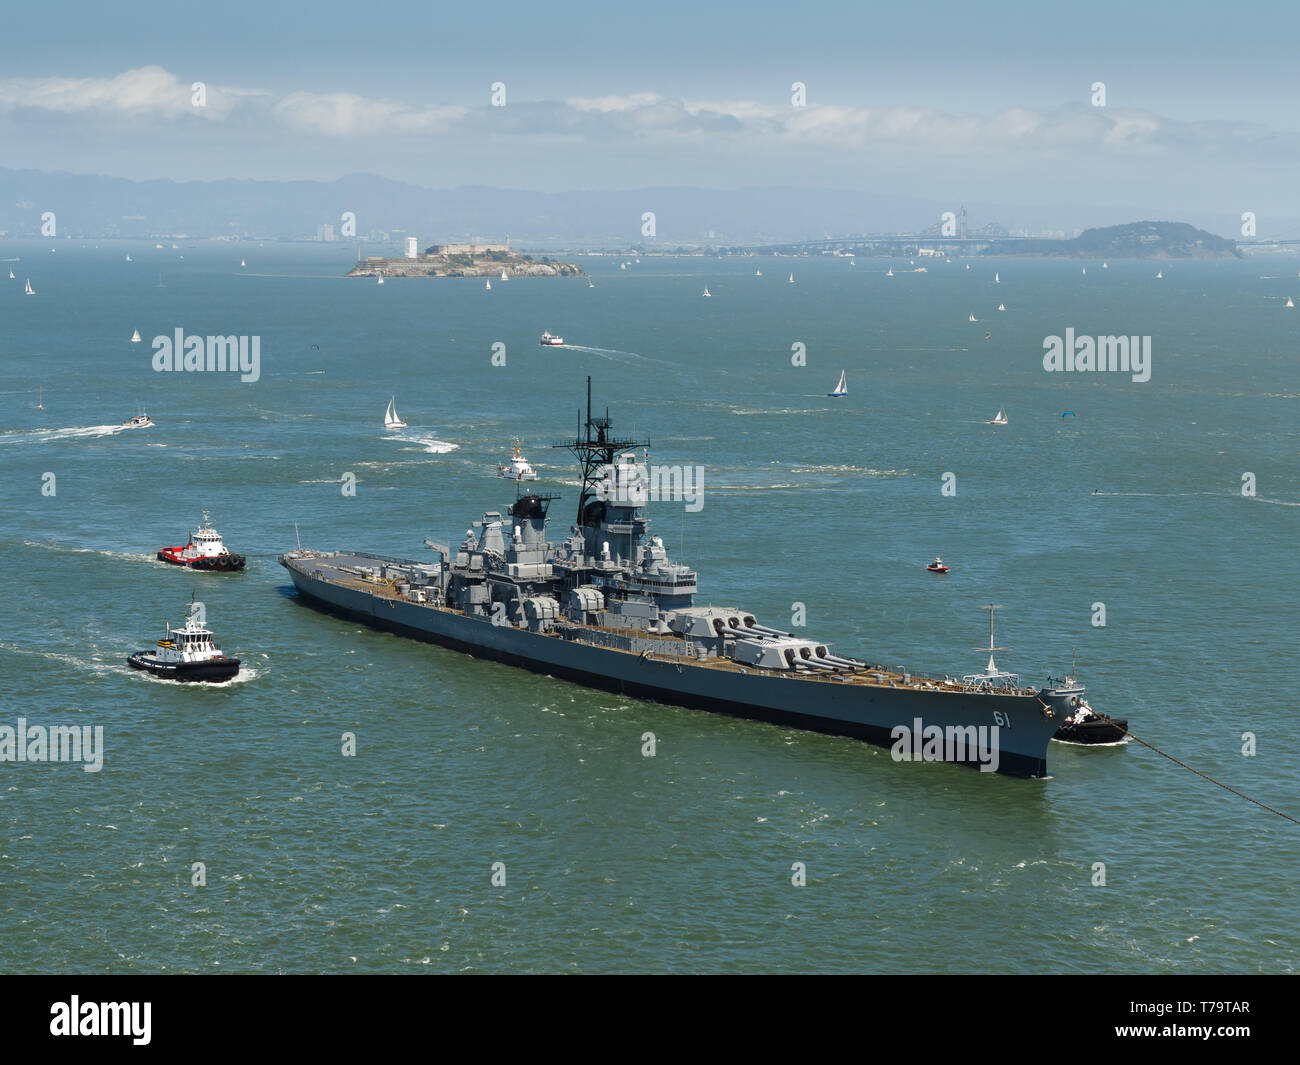 Closeup view of the side of a navy world war II battleship, and tugboats leaving San Francisco harbor with hundreds of sailboats dotting water under s Stock Photo